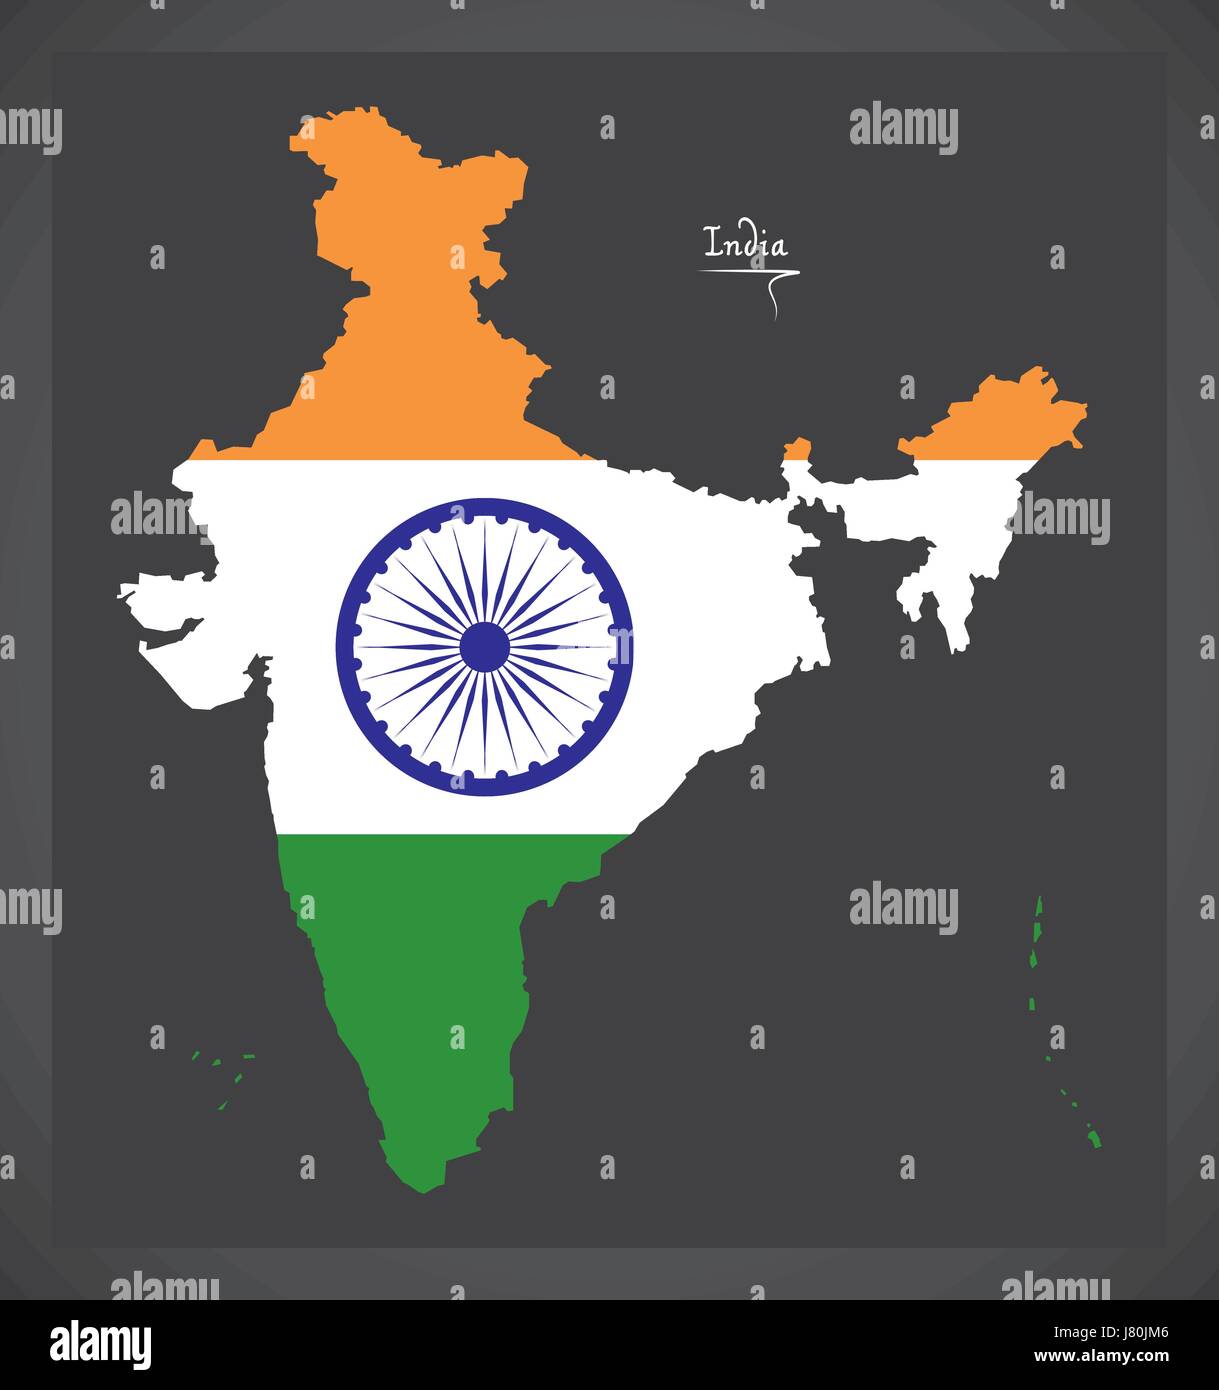 India map with Indian national flag illustration Stock Vector